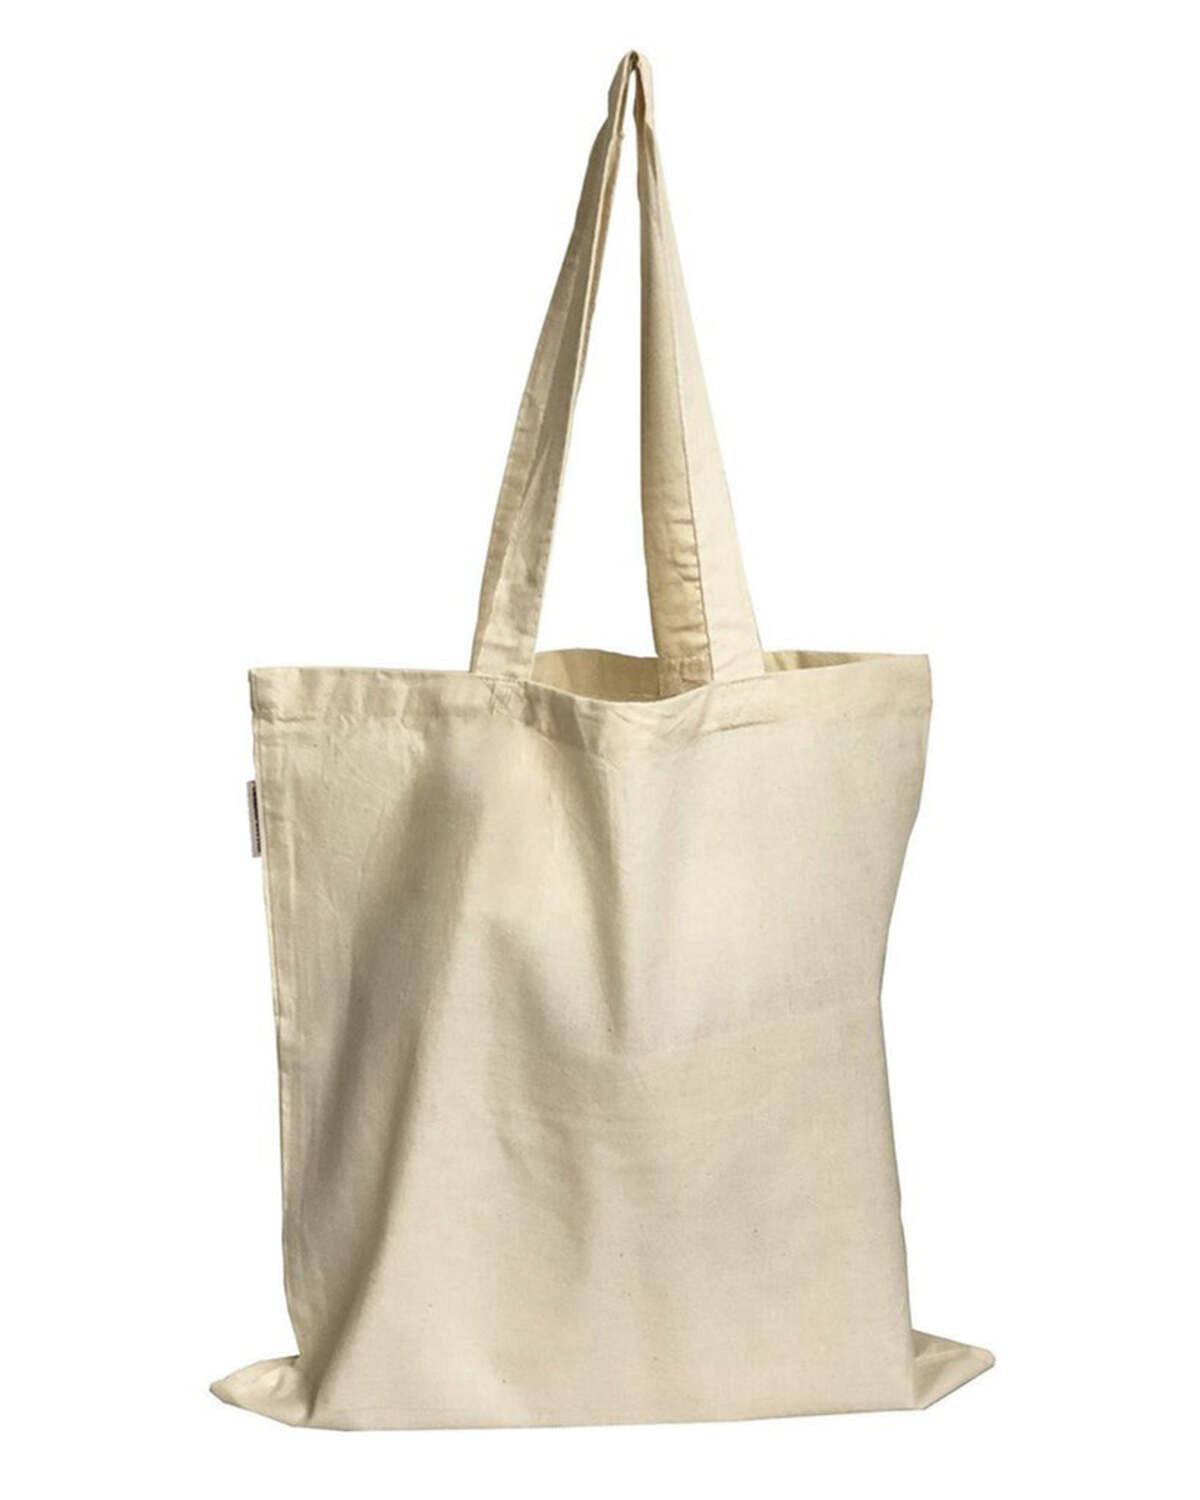 How Branded Tote Bags Can Dramatically Benefit Your Business